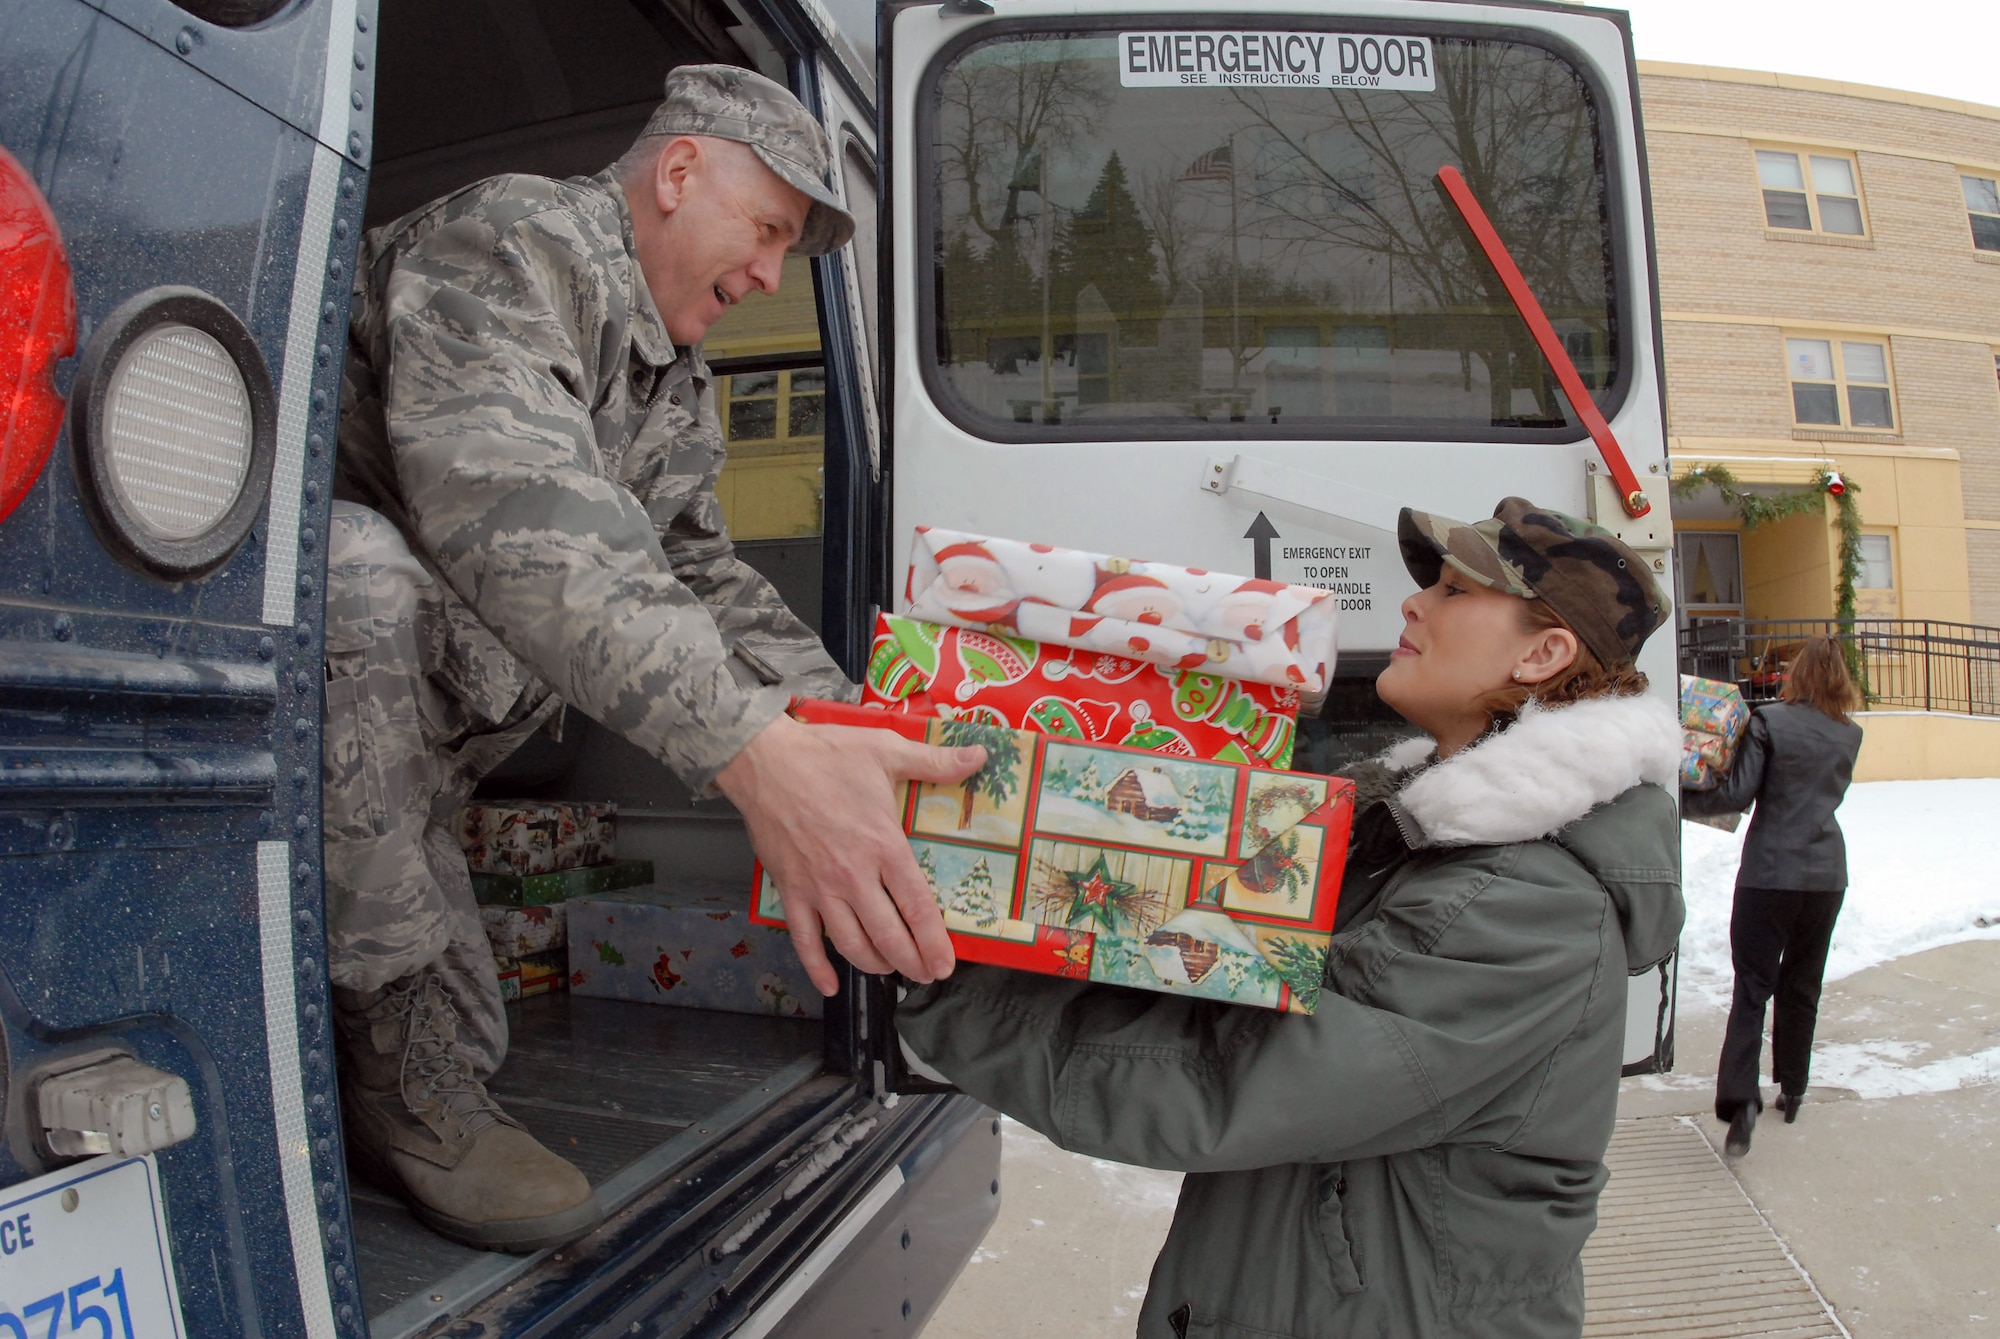 Senior Master Sgt. Paul Tangen hands Christmas gifts to Master Sgt. Merri Jo Filloon as they deliver presents to the North Dakota Veteran's Nursing Home Dec. 10 in Lisbon, N.D. The gifts are given to veterans at the nursing home by the North Dakota Air and Army National Guard each December using funds raised through personal donations given by the North Dakota National Guard members. Sergeant Tangen is the the 119th Wing first sergeant, and Sergeant Filloon is assigned to the 119th Mission Support Flight. (U.S. Air Force photo/Senior Master Sgt. David H. Lipp)  